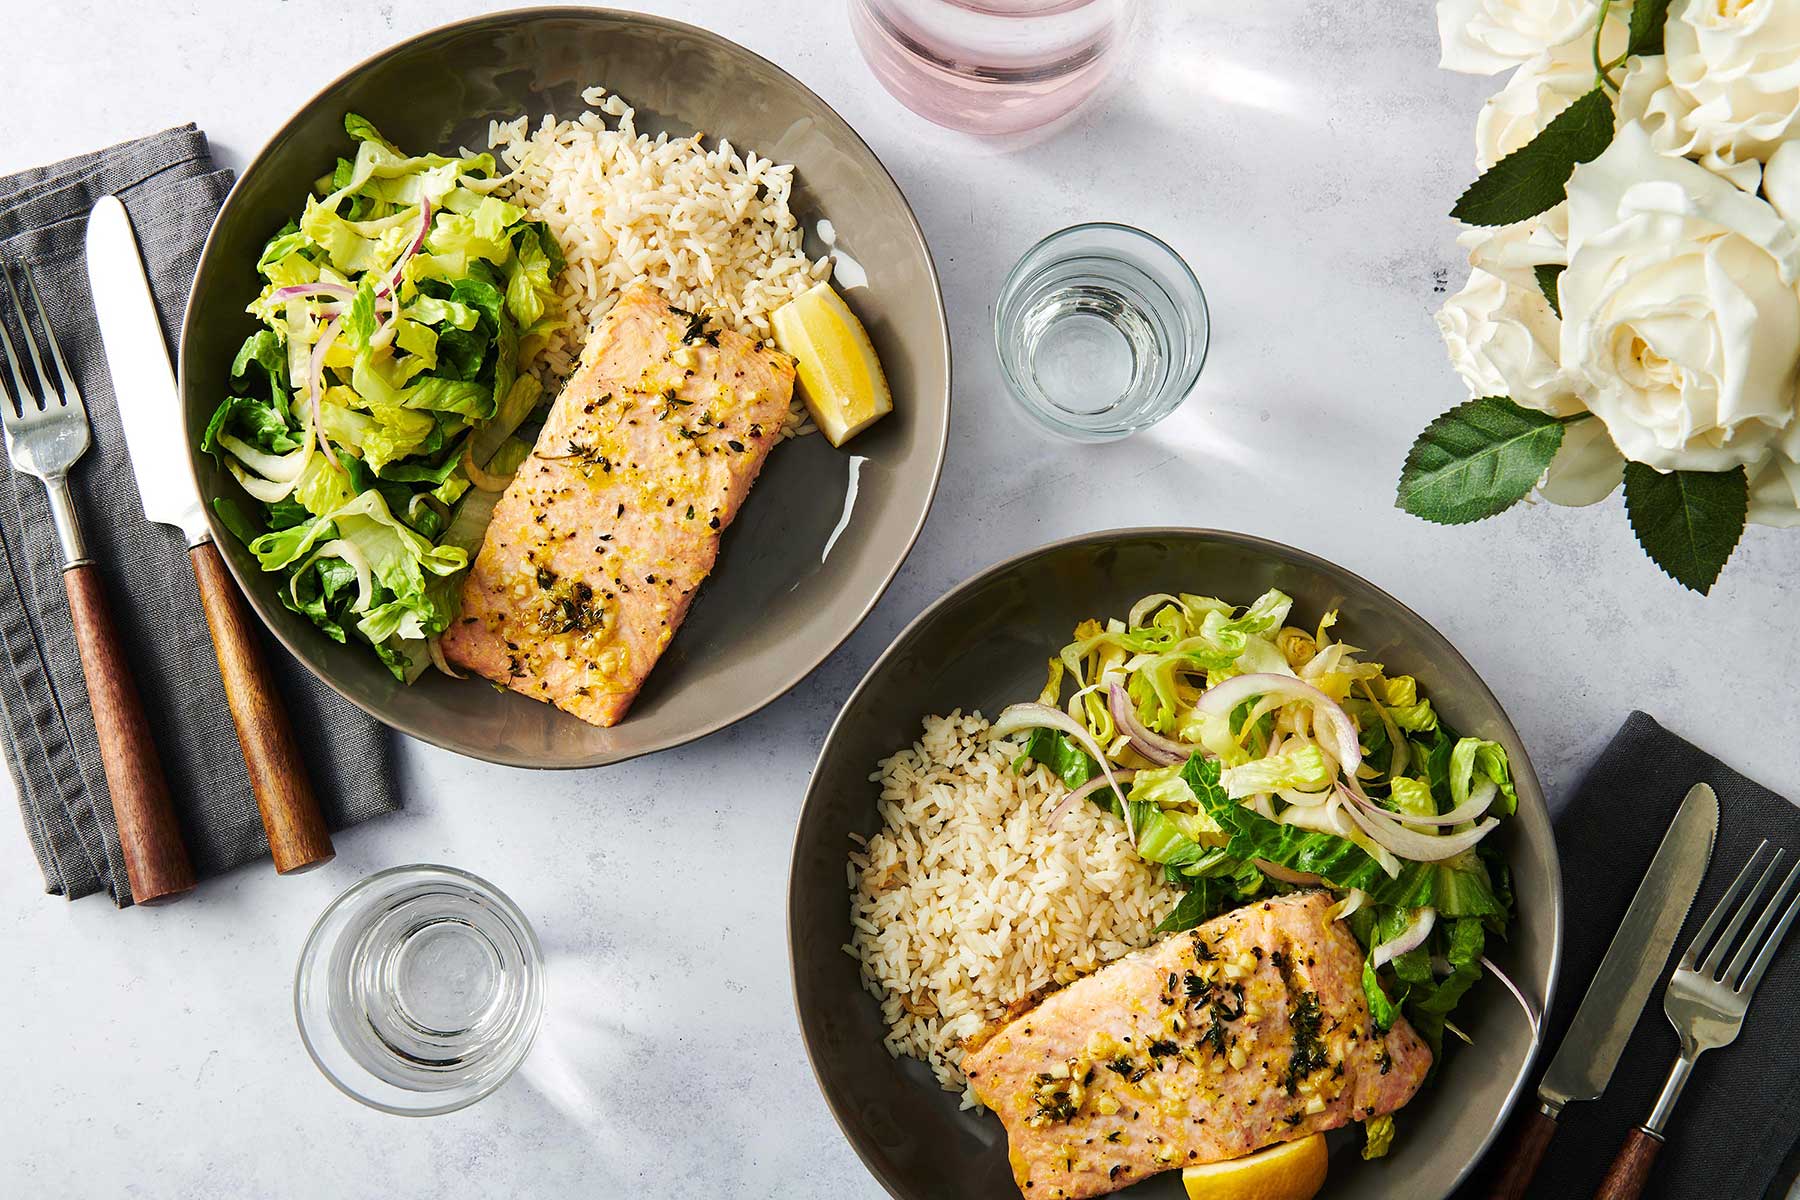 Two dark plates of baked salmon, salad, and rice on a white table.